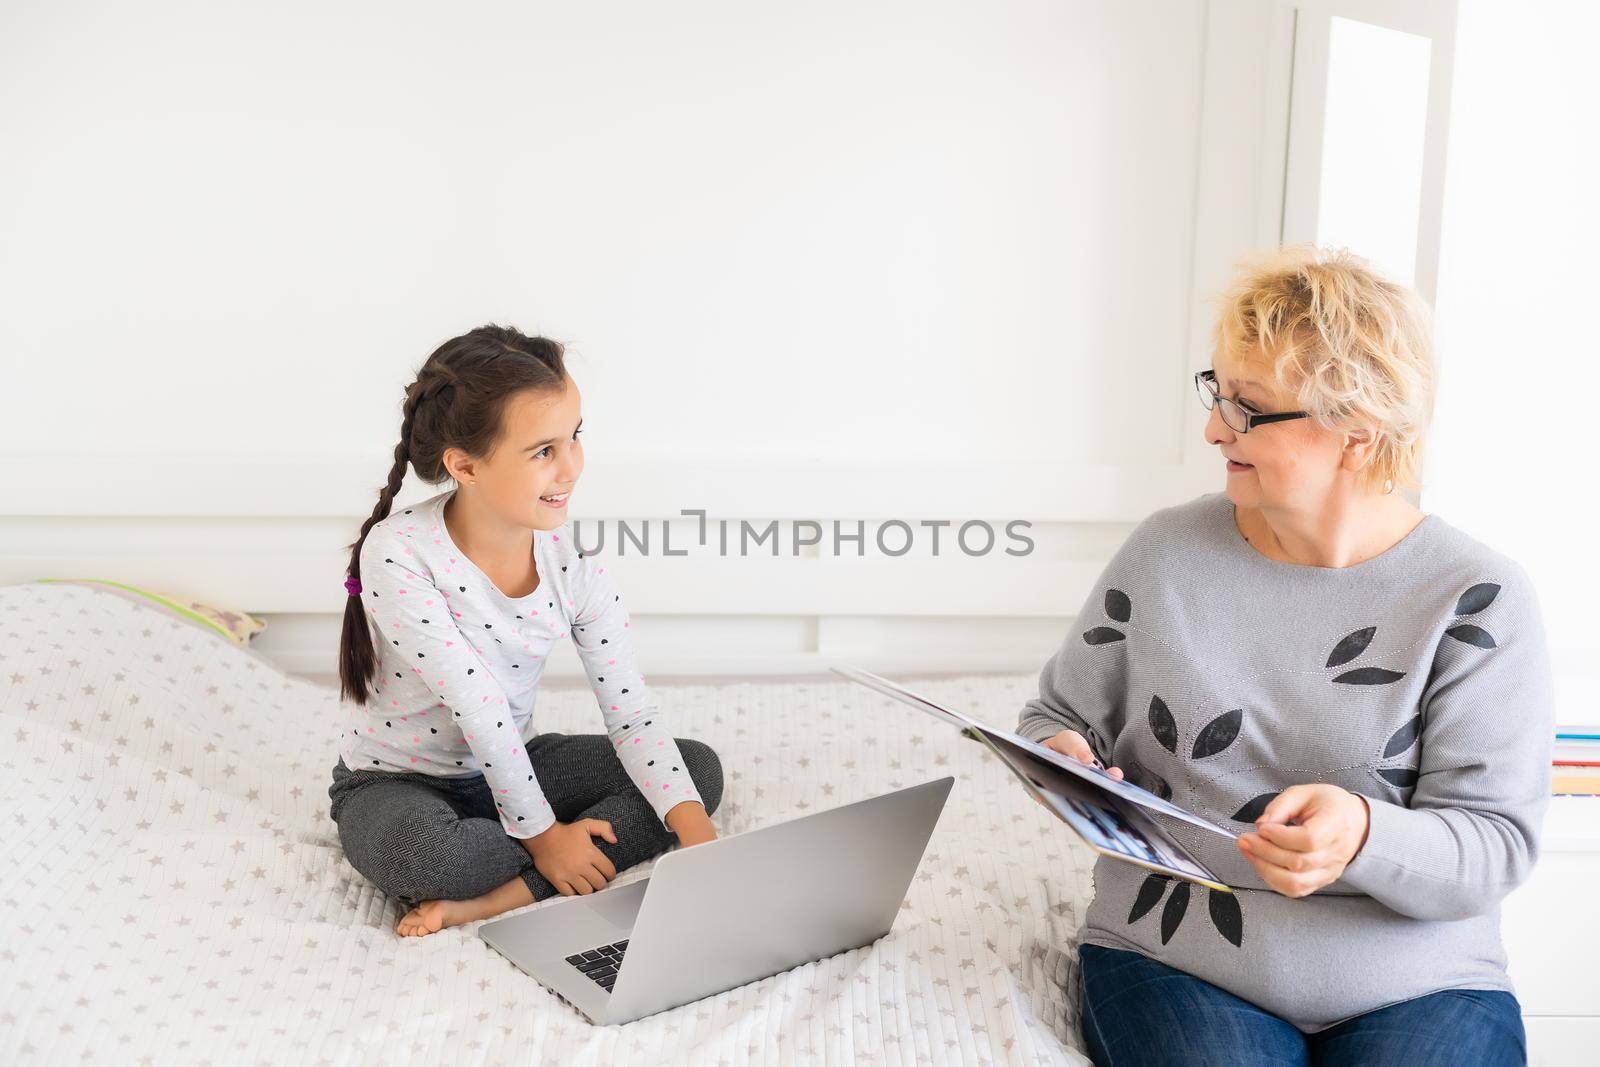 Cute and happy little girl child using laptop computer with her grandma, studying through online e-learning system.